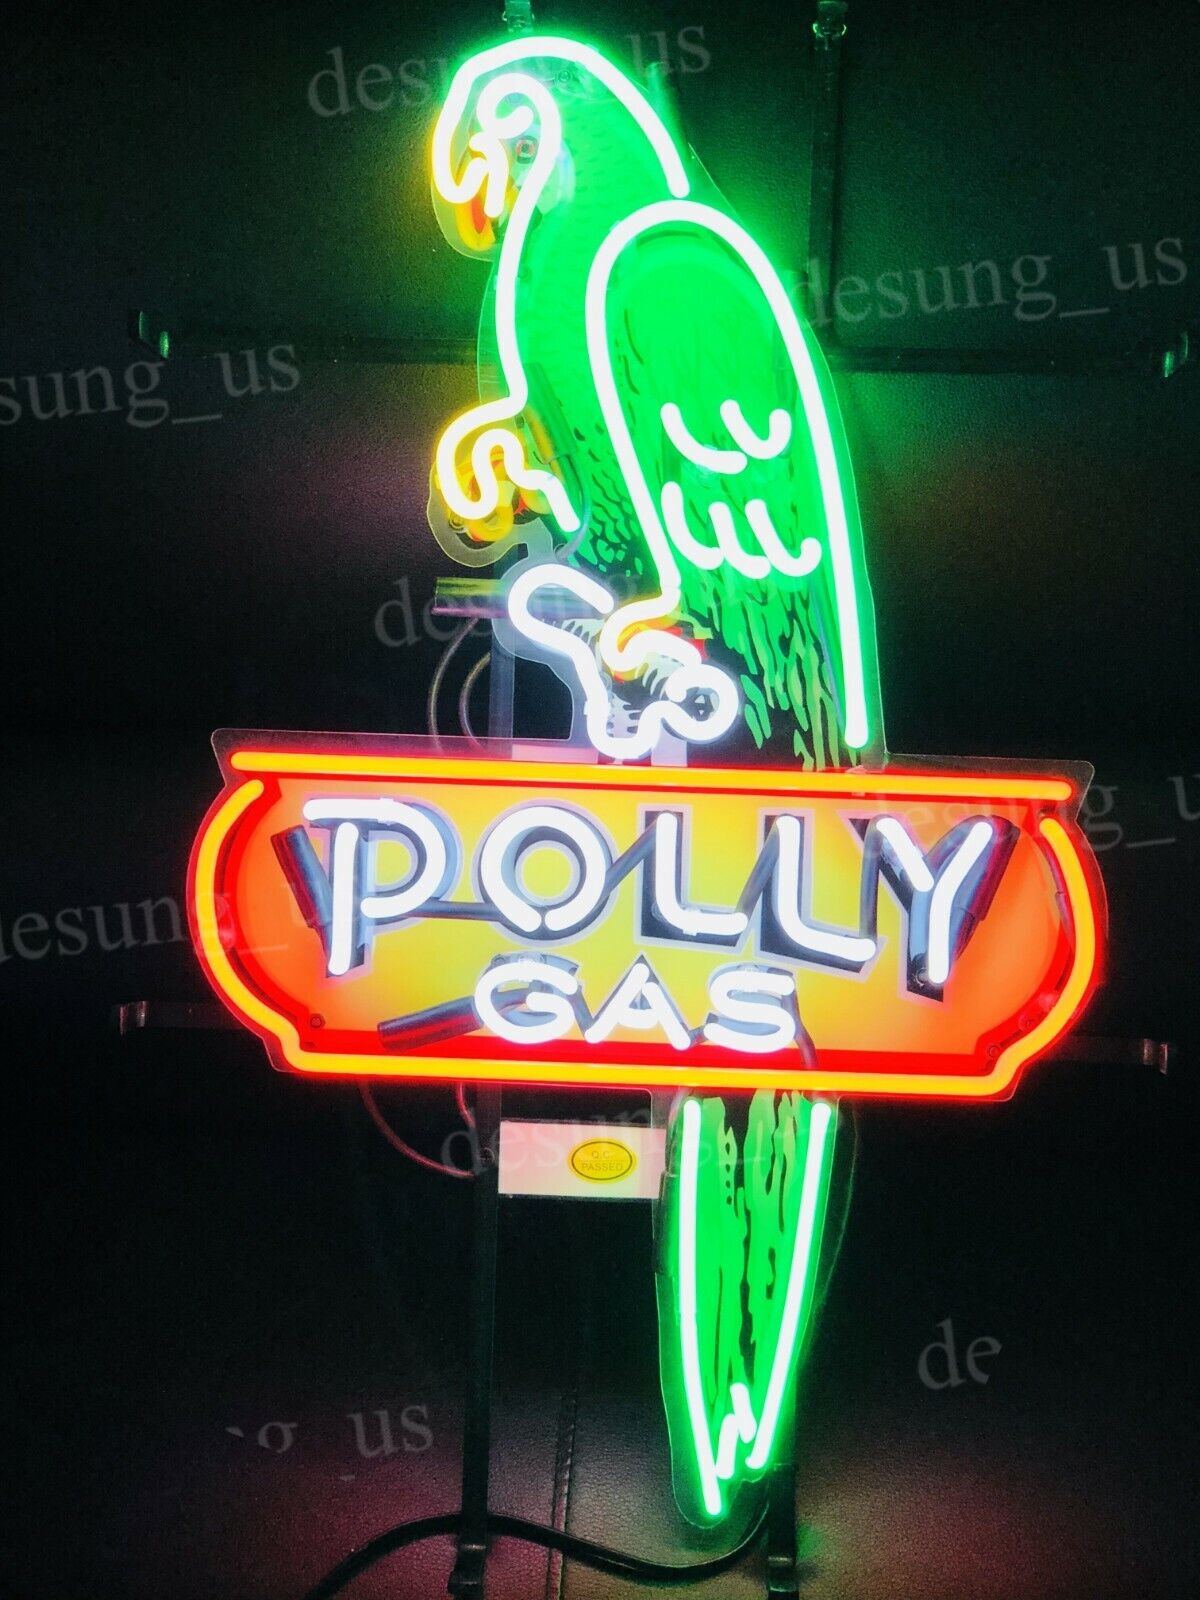 New Polly Gas Gasoline Oil Lamp Neon Light Sign HD Vivid Printing 24\